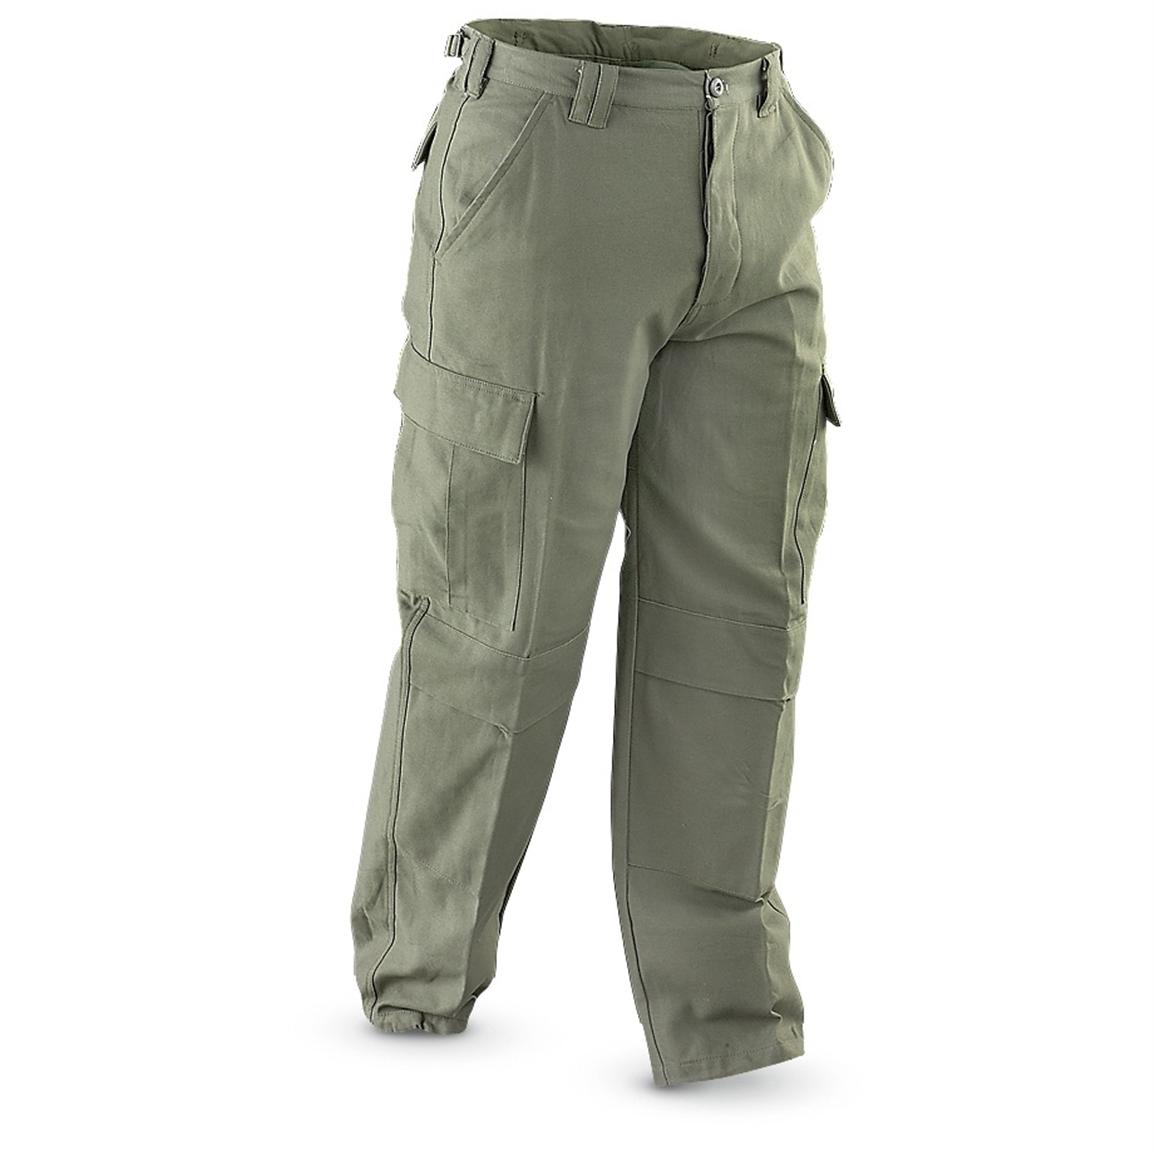 Military - style BDU Pants - 197648, Pants at Sportsman's Guide